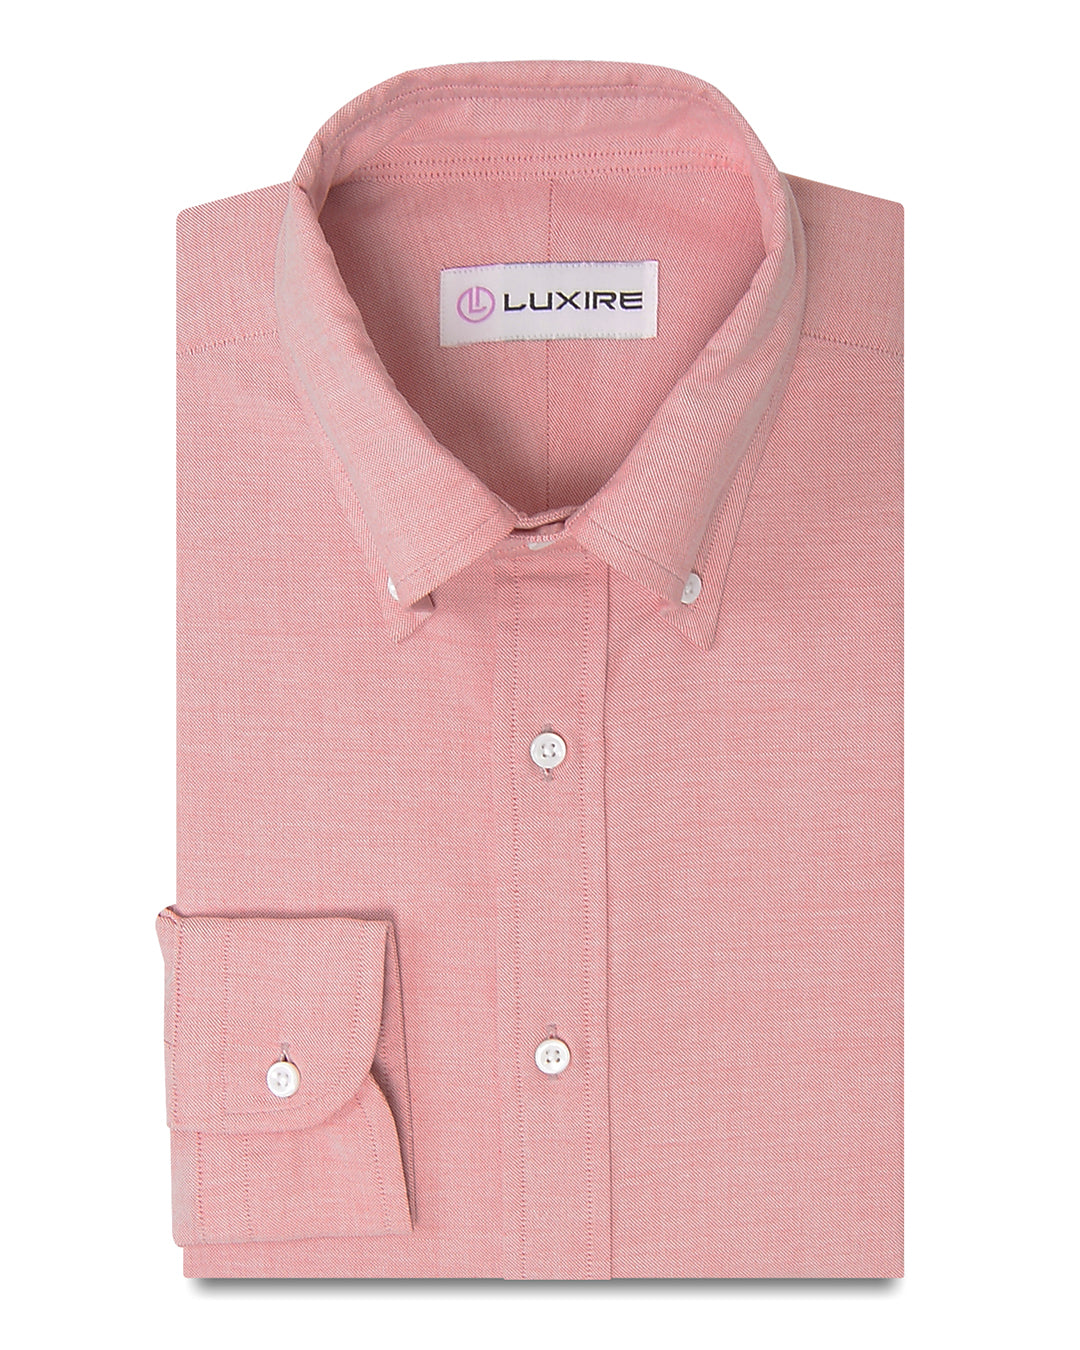 Front of the custom oxford shirt for men by Luxire in red on white